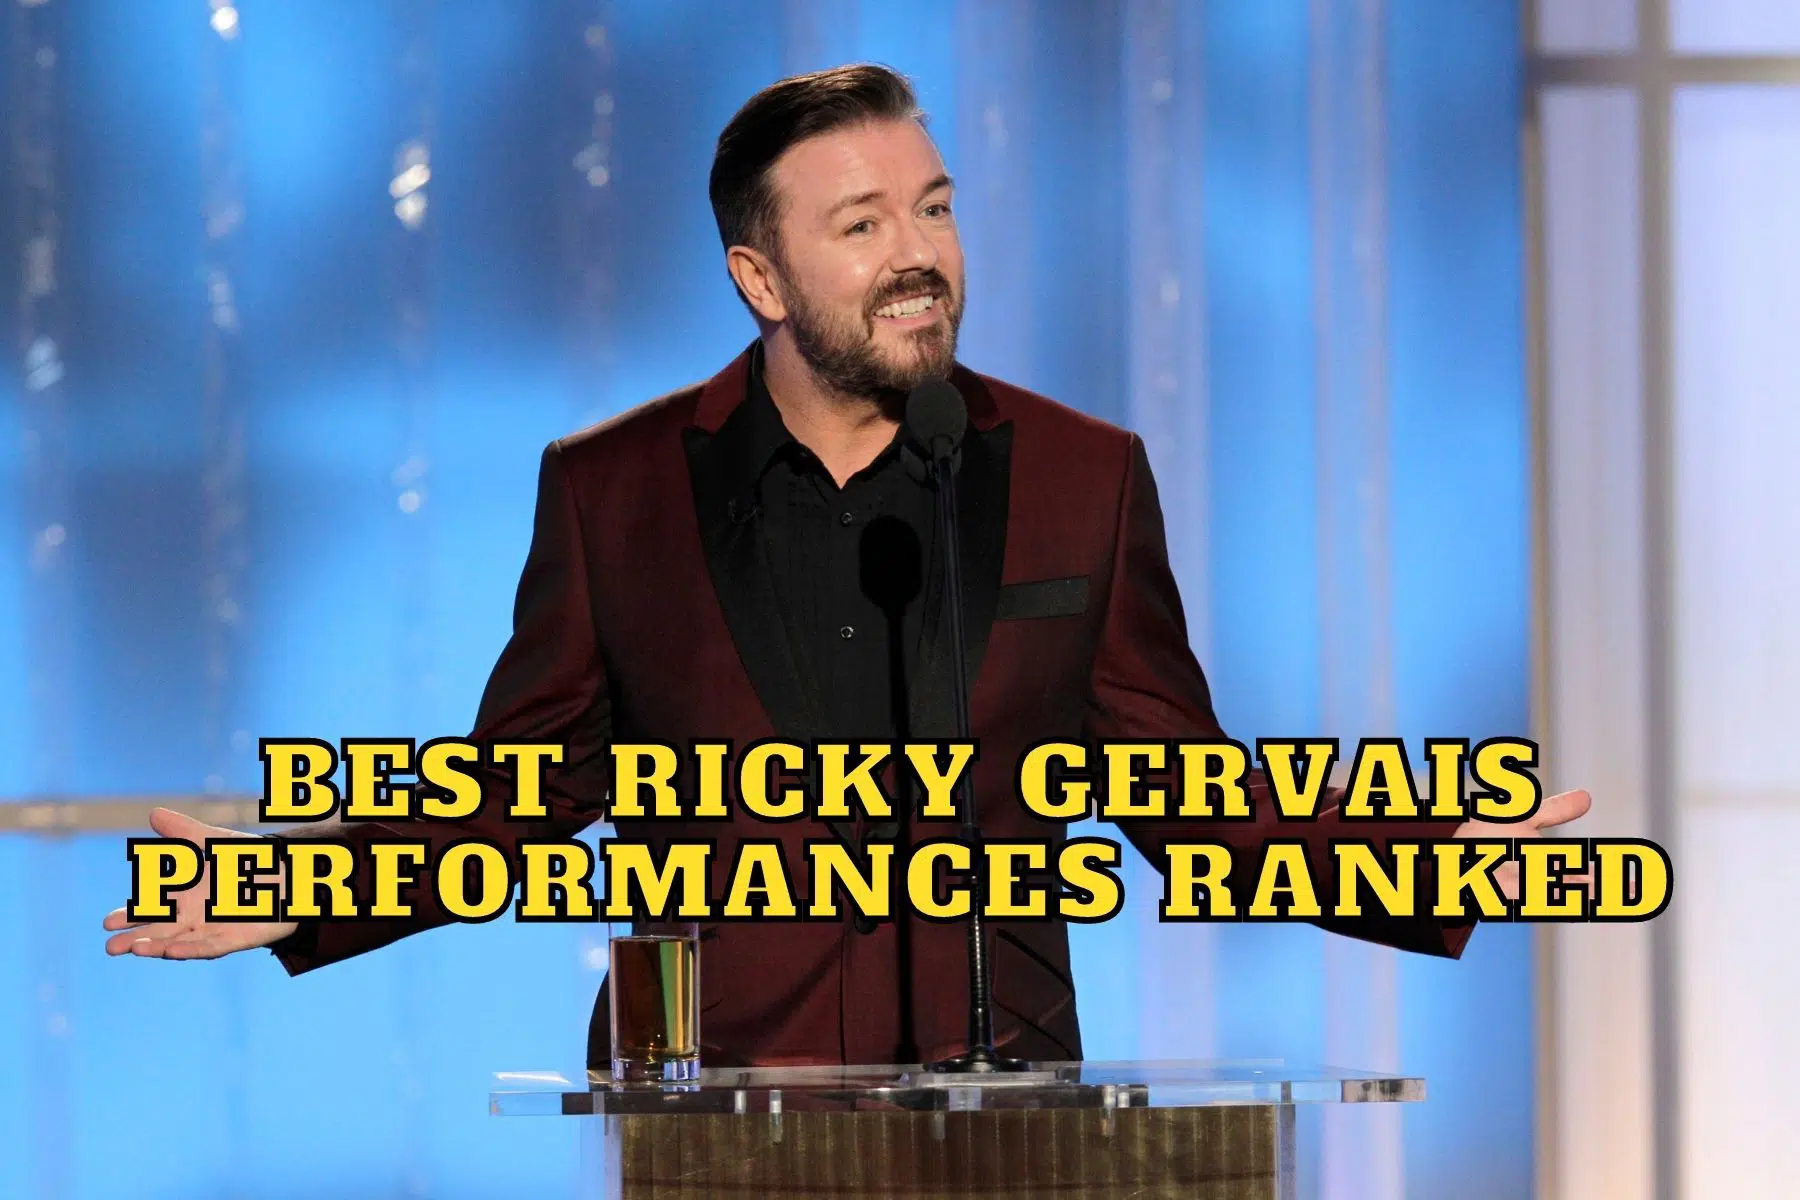 Best Ricky Gervais Performances Ranked